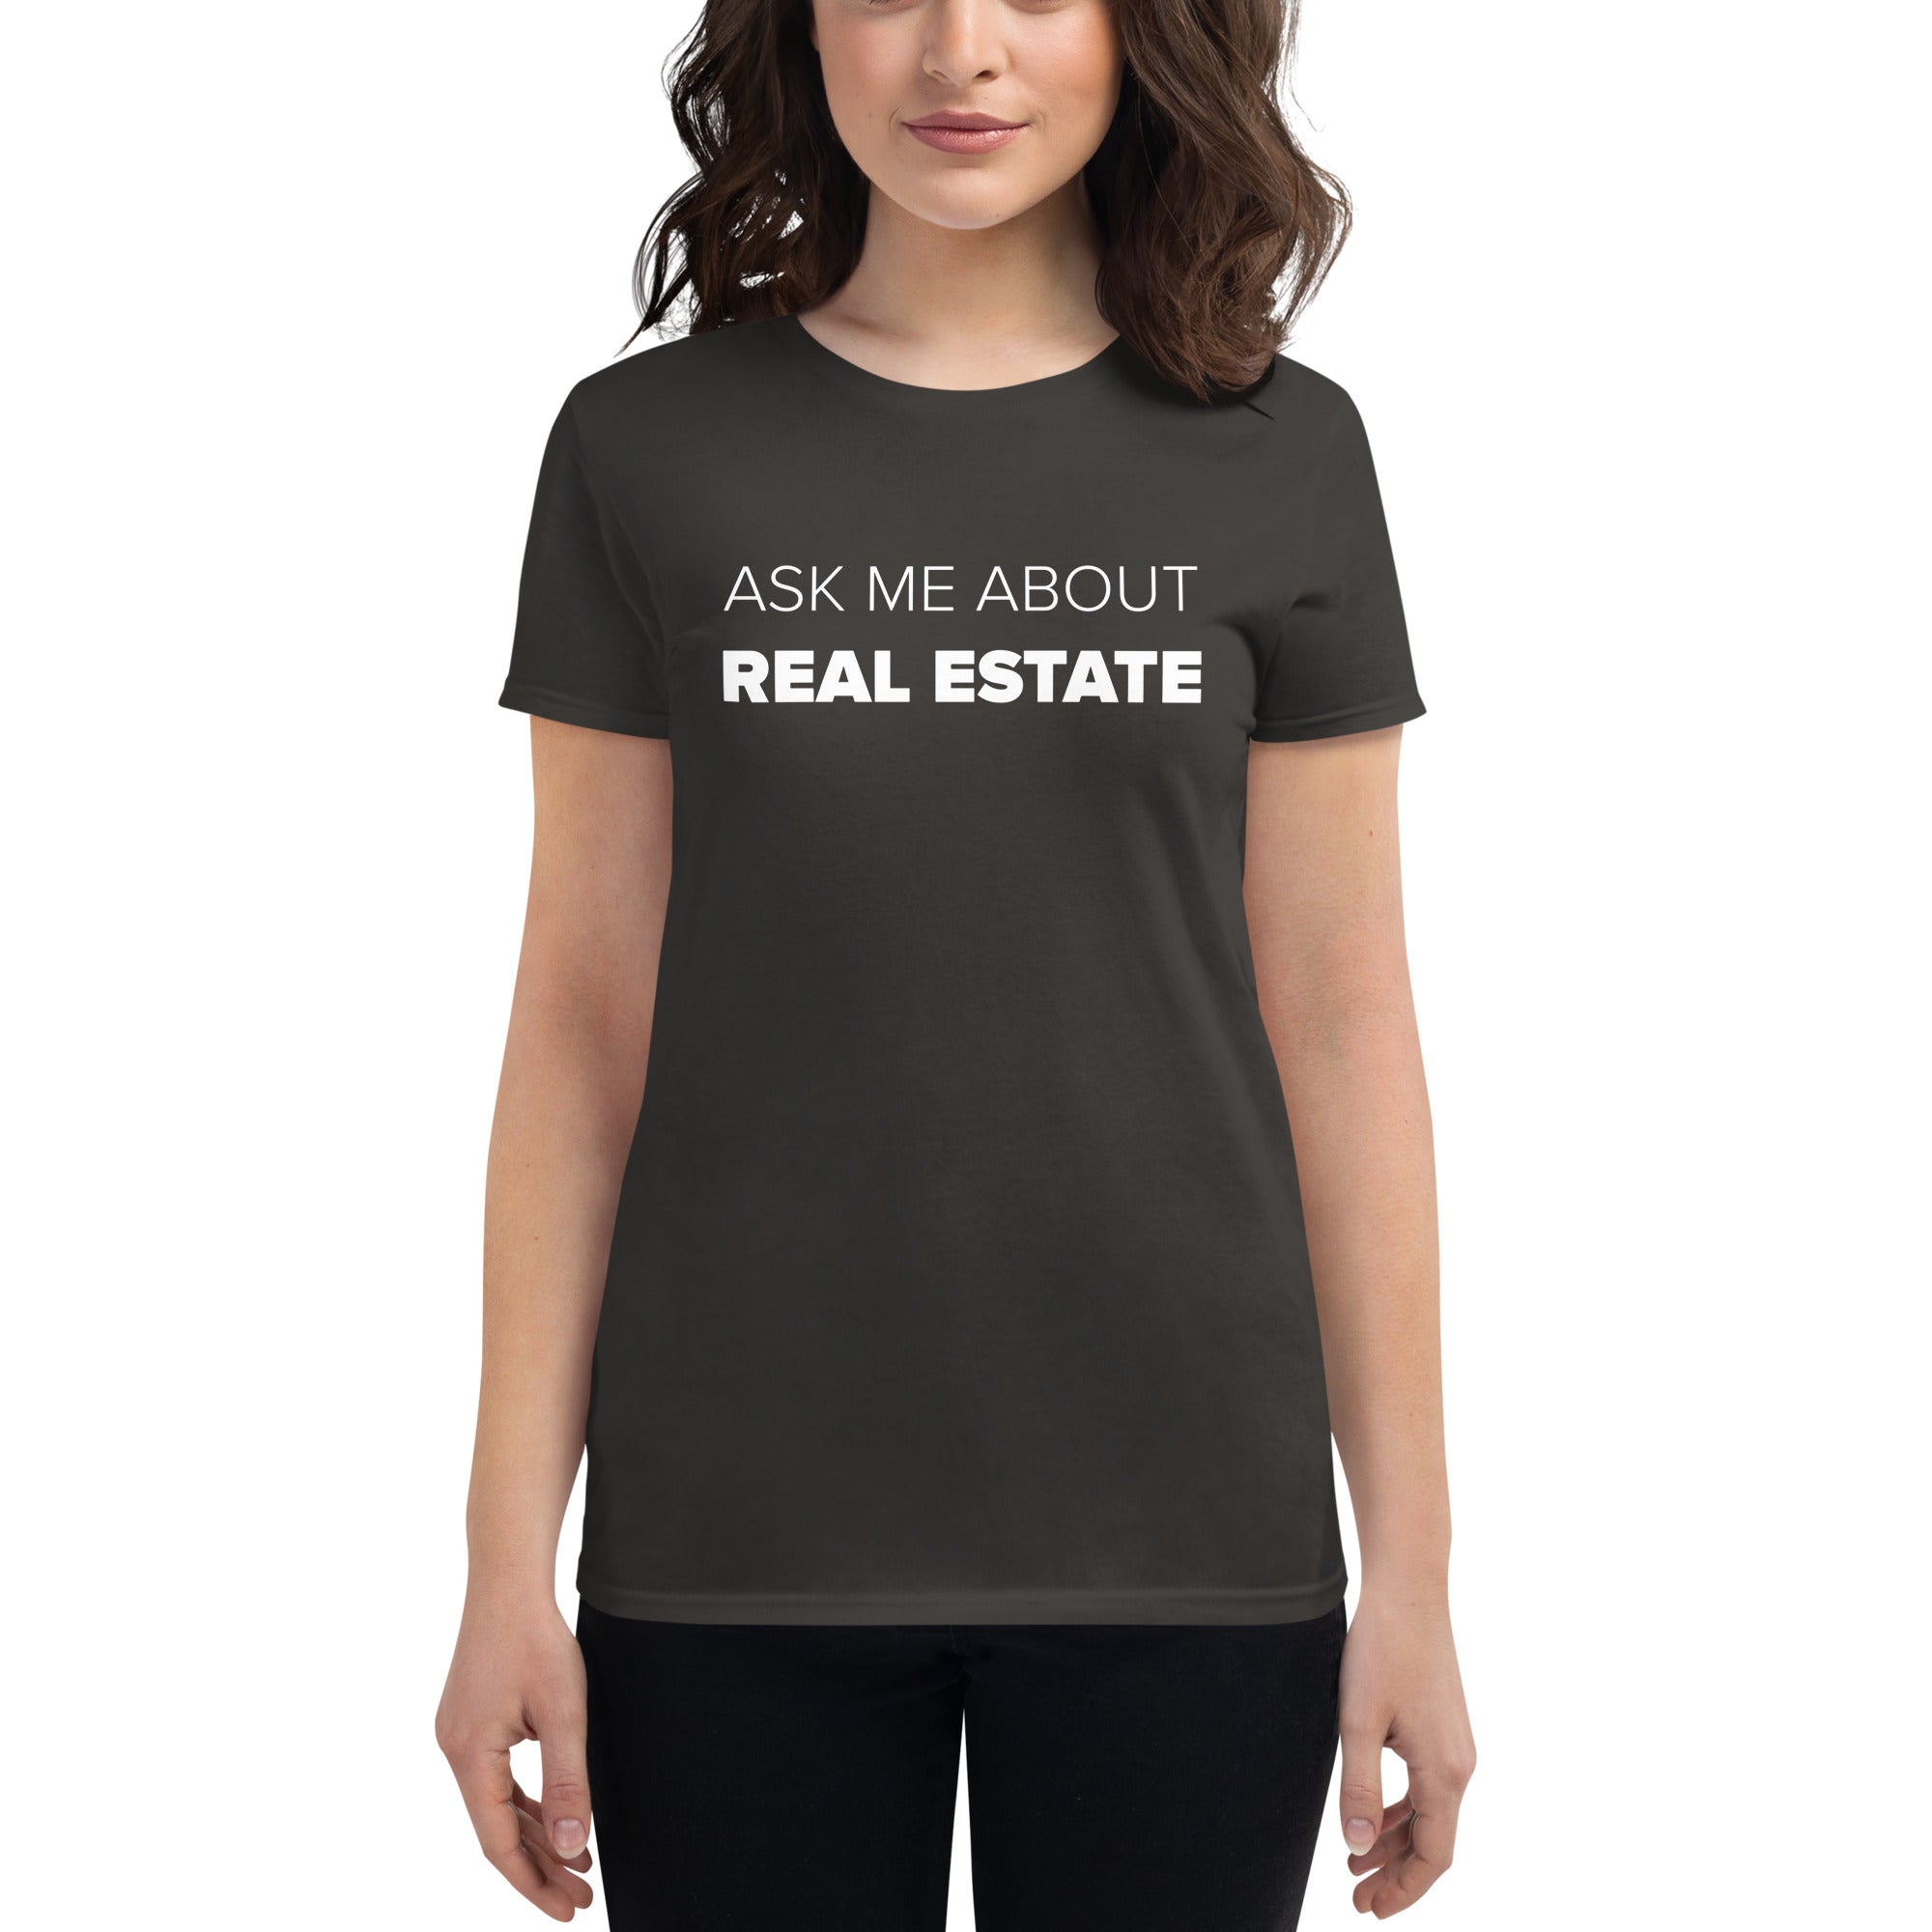 Ask Me About Real Estate Women's Fit Short Sleeve T-shirt